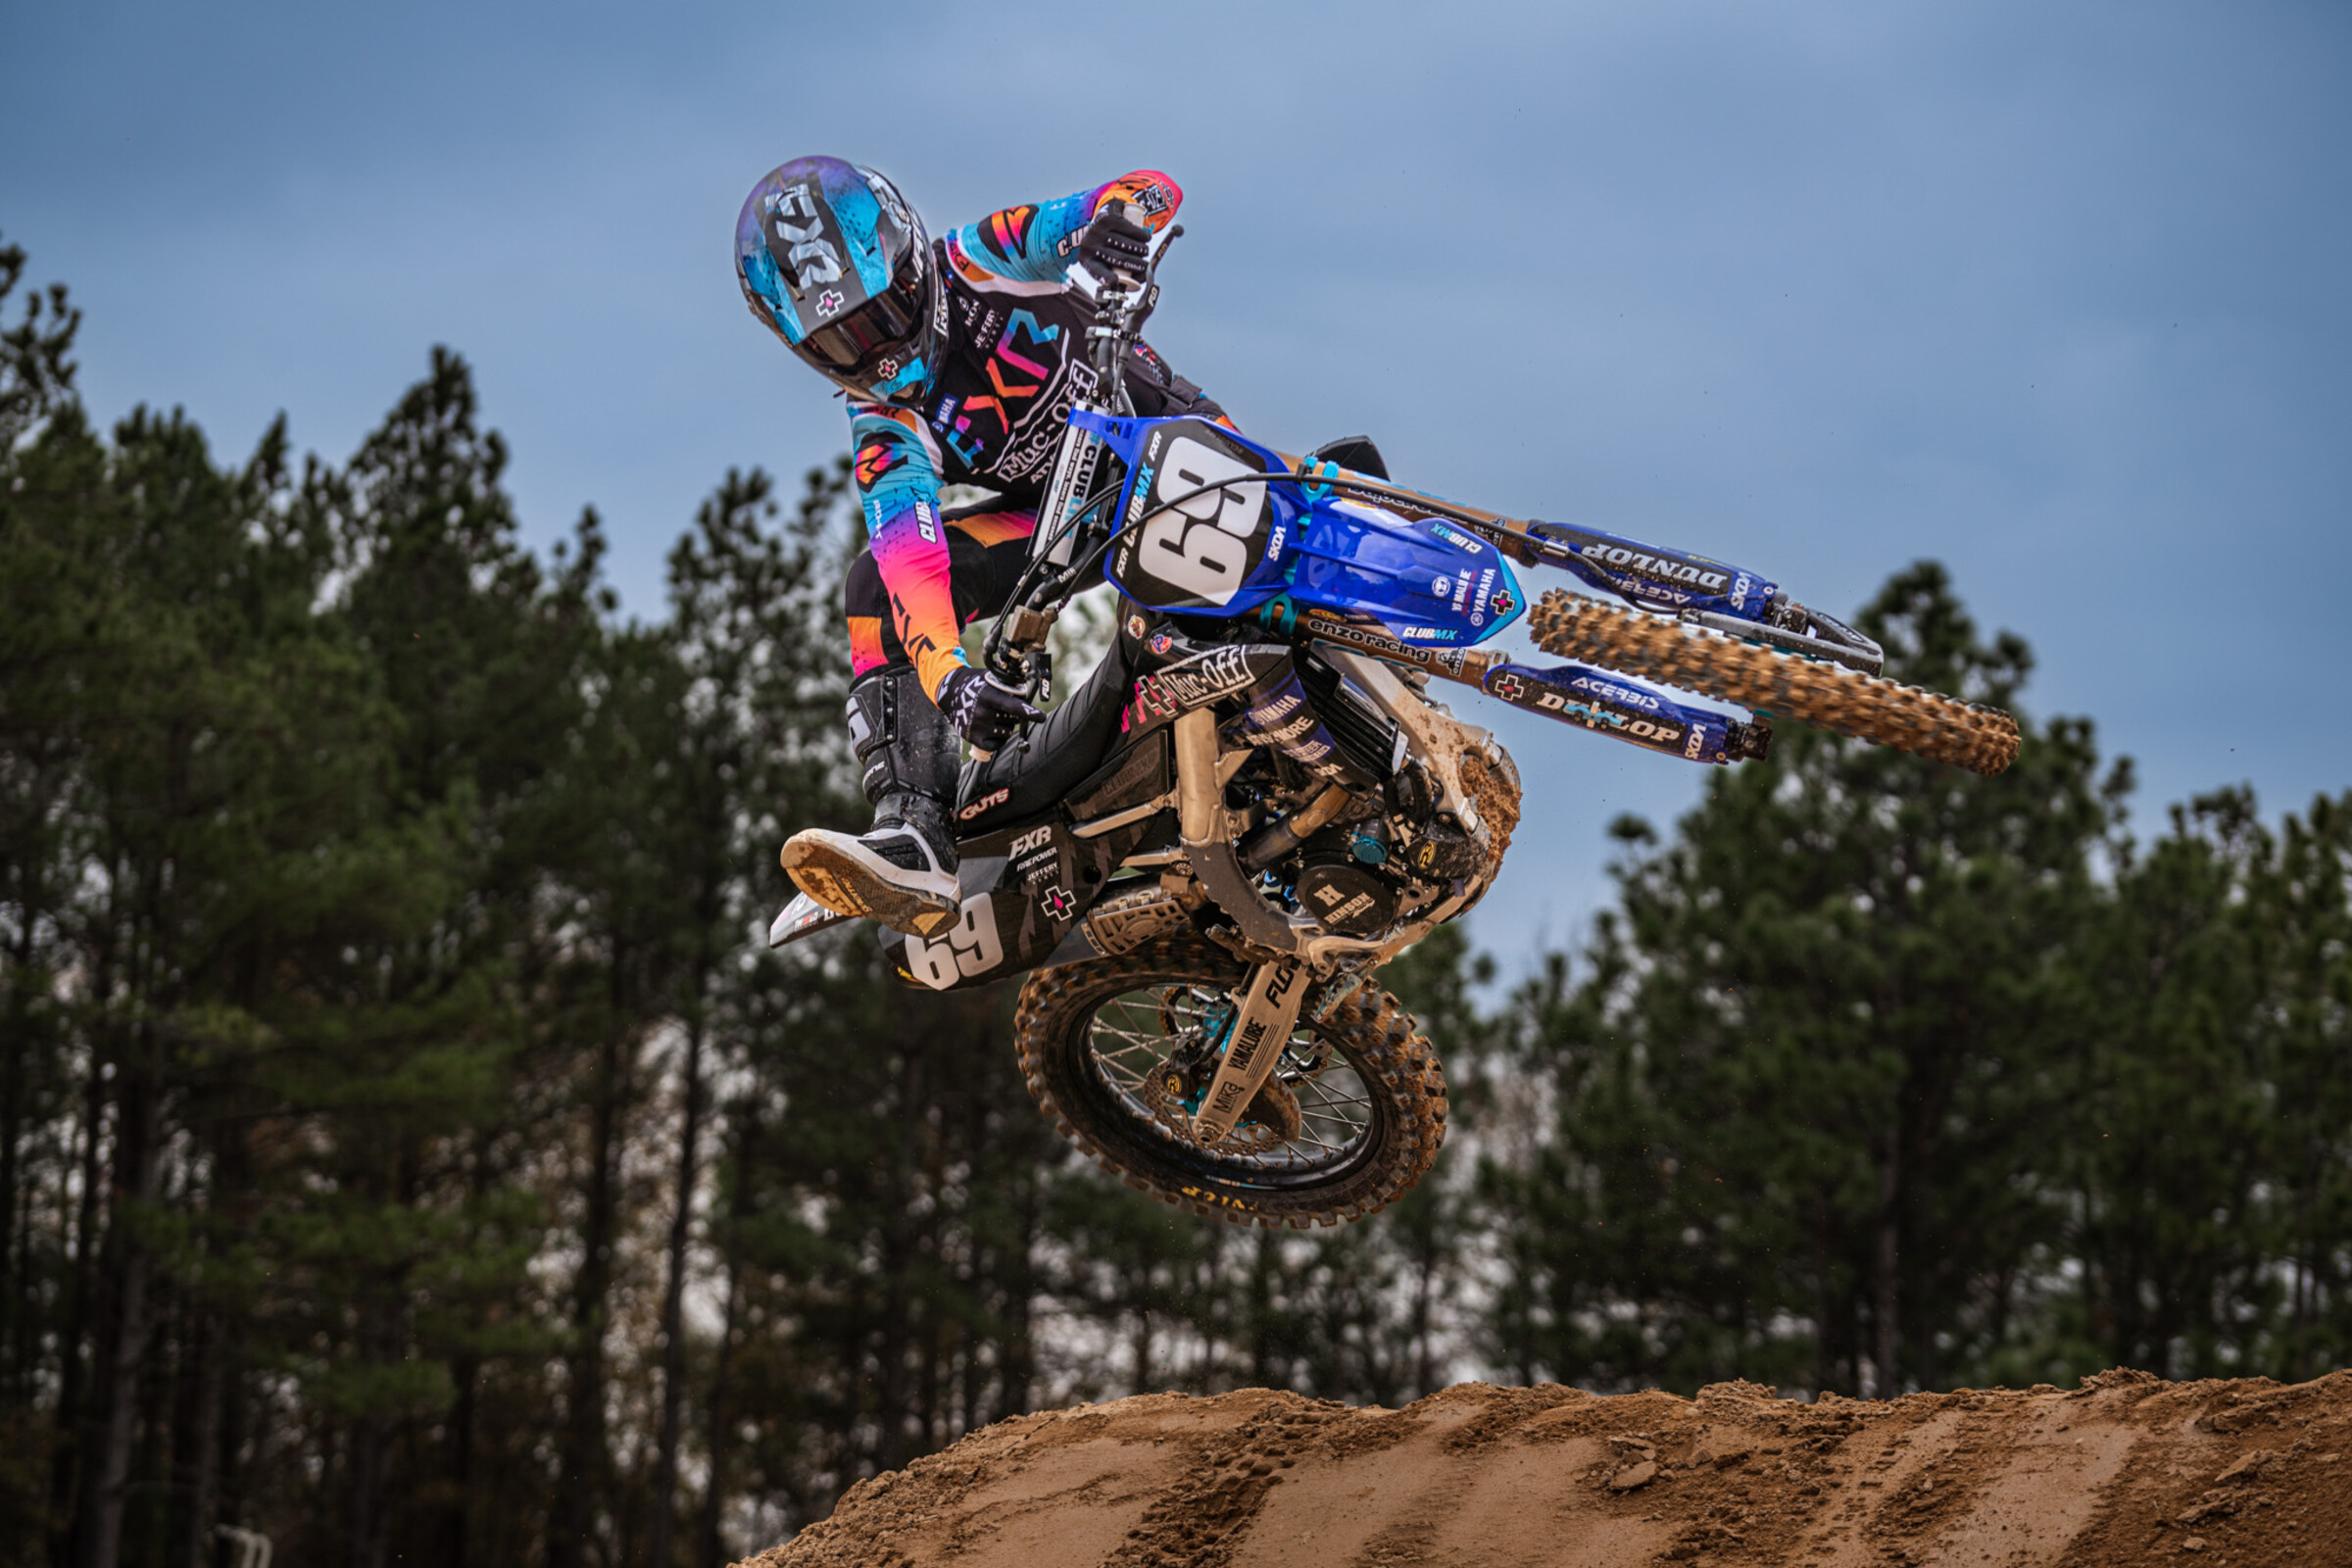 SuperMotocross Video Pass to Debut for International Viewership